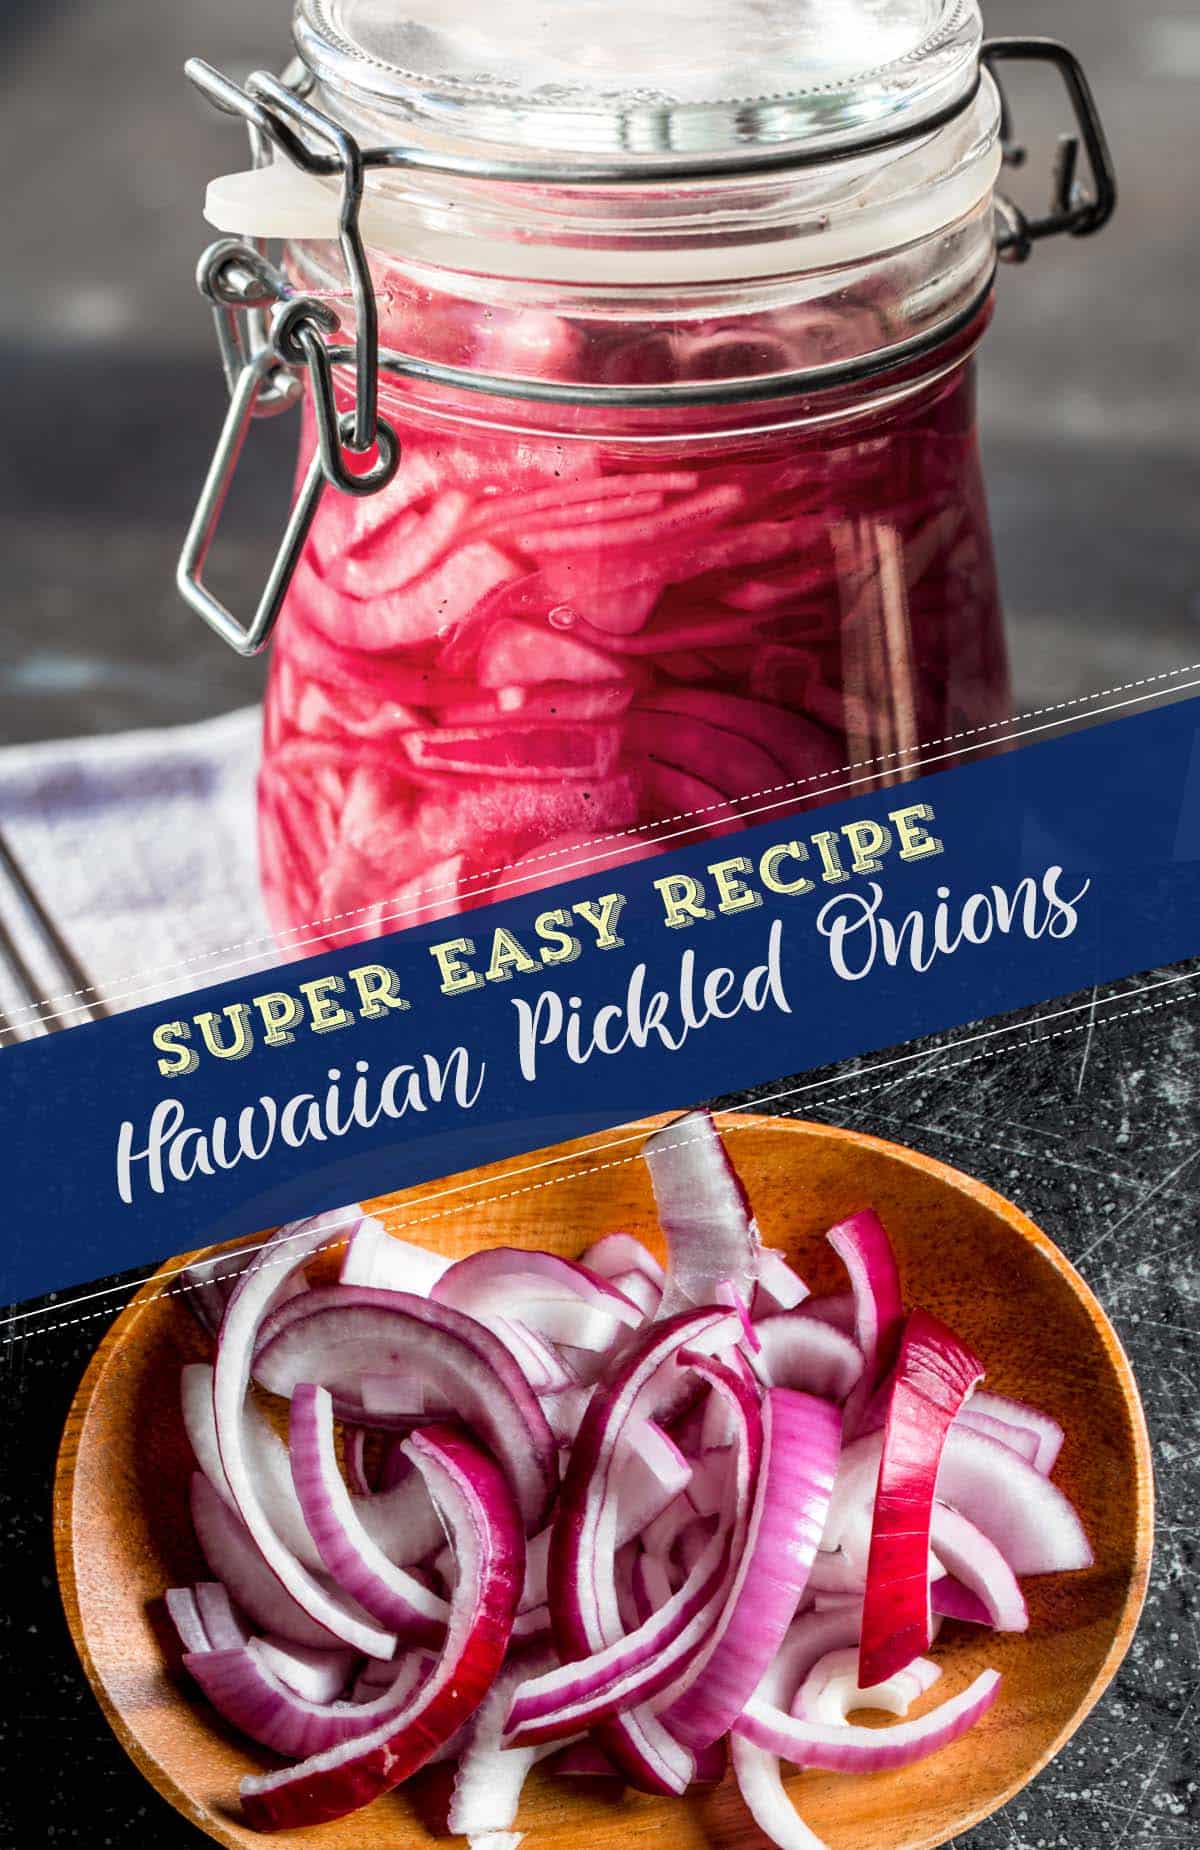 Adding Hawaiian Pickled Onions to your dishes can enhance the flavors and add an extra layer of complexity to your cooking. Hawaiian Pickled Onions’ tangy, spicy, and slightly sweet flavor is a delicious and versatile addition to various recipes.